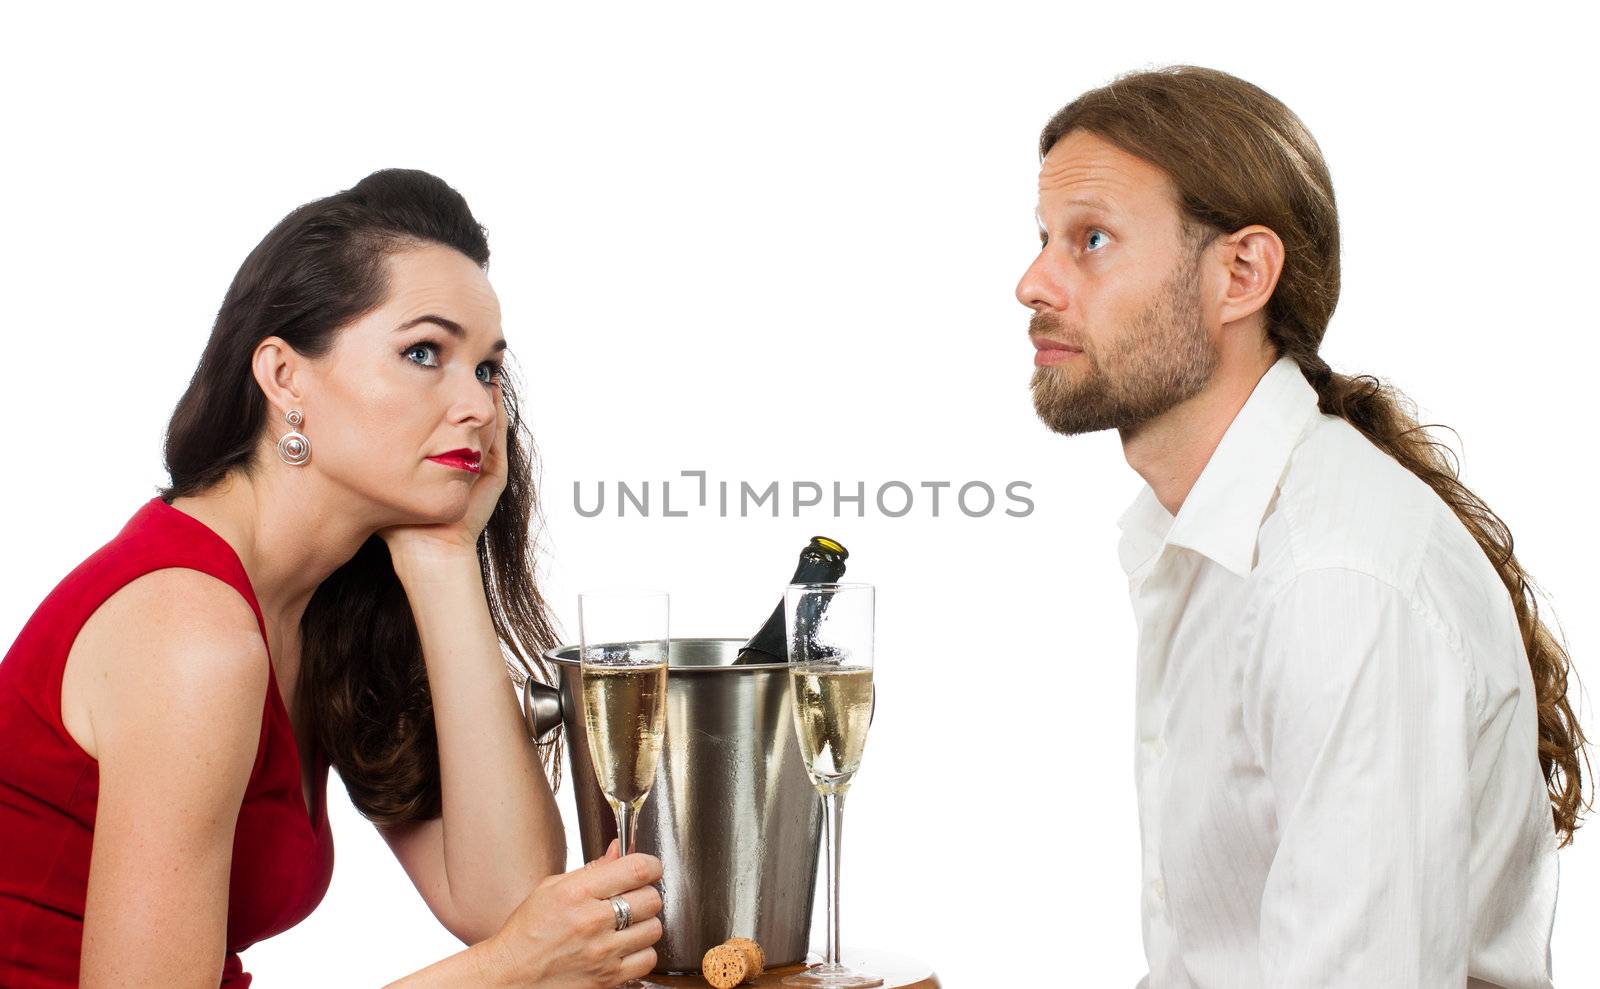 A bored couple out on a Champagne date avoiding eye contact. Isolated on white.